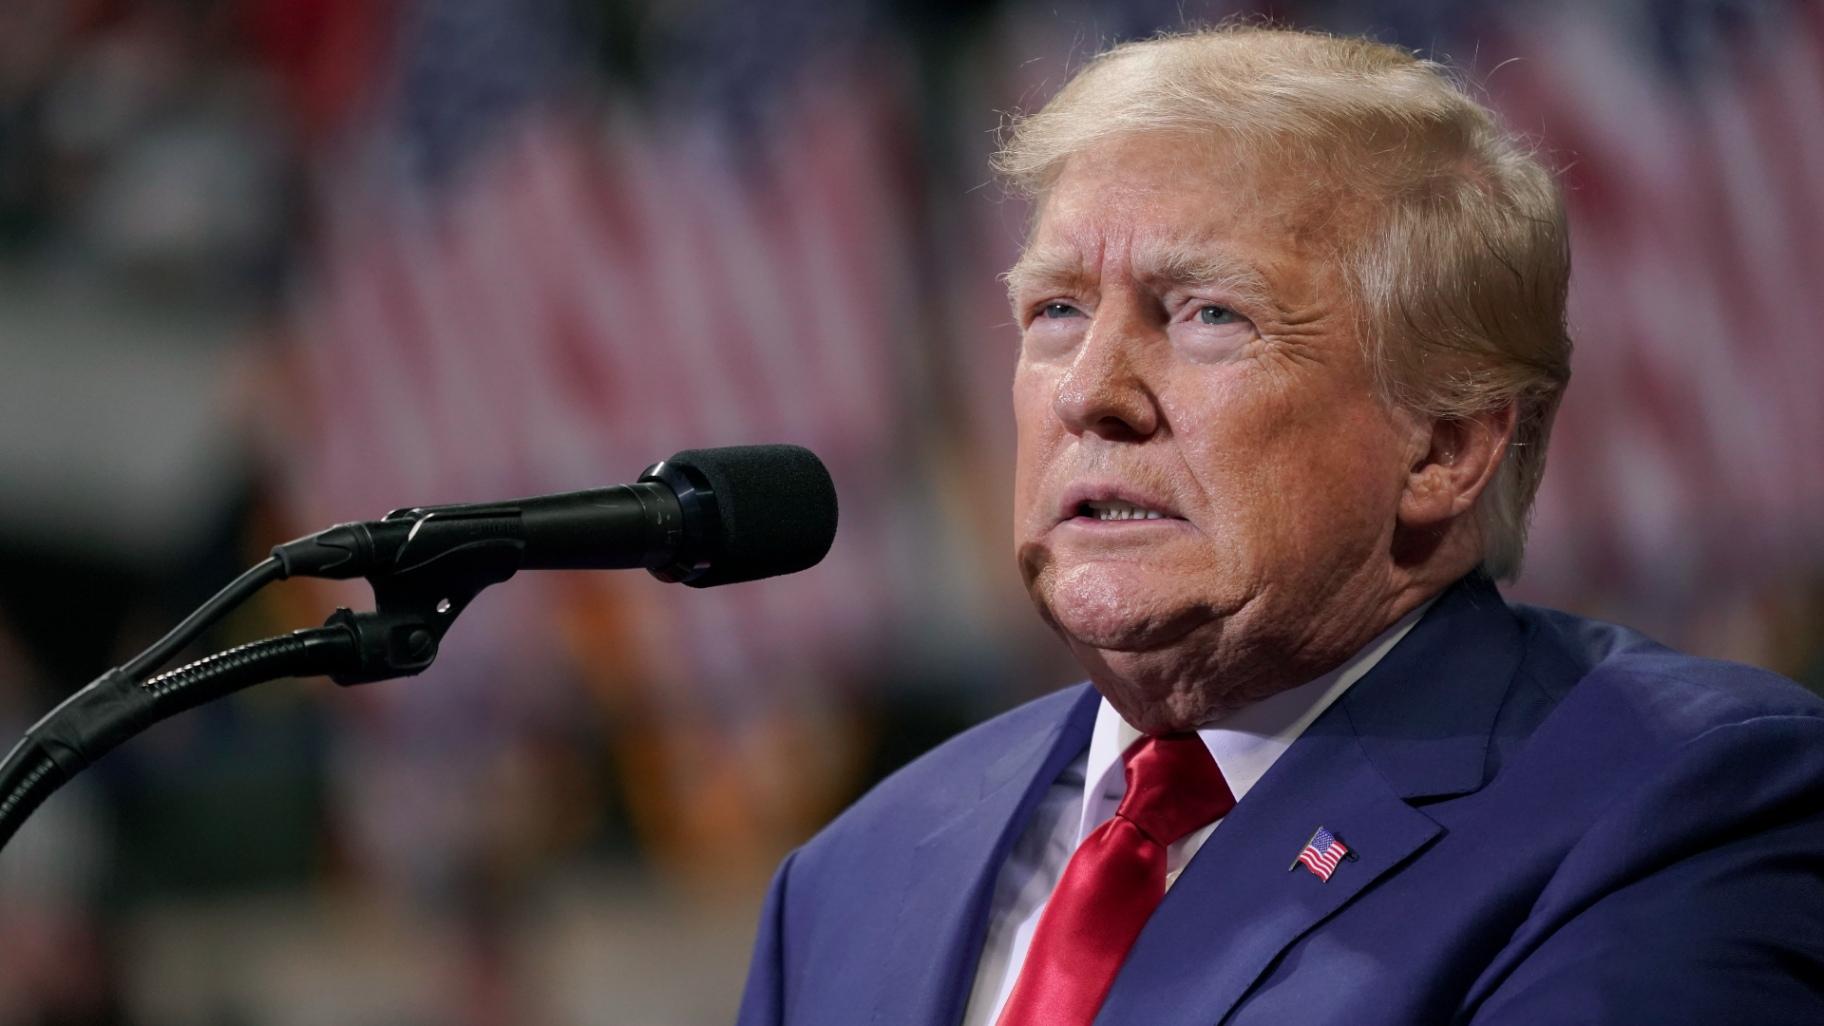 Former President Donald Trump speaks at a rally in Wilkes-Barre, Pa., Saturday, Sept. 3, 2022. (AP Photo / Mary Altaffer)